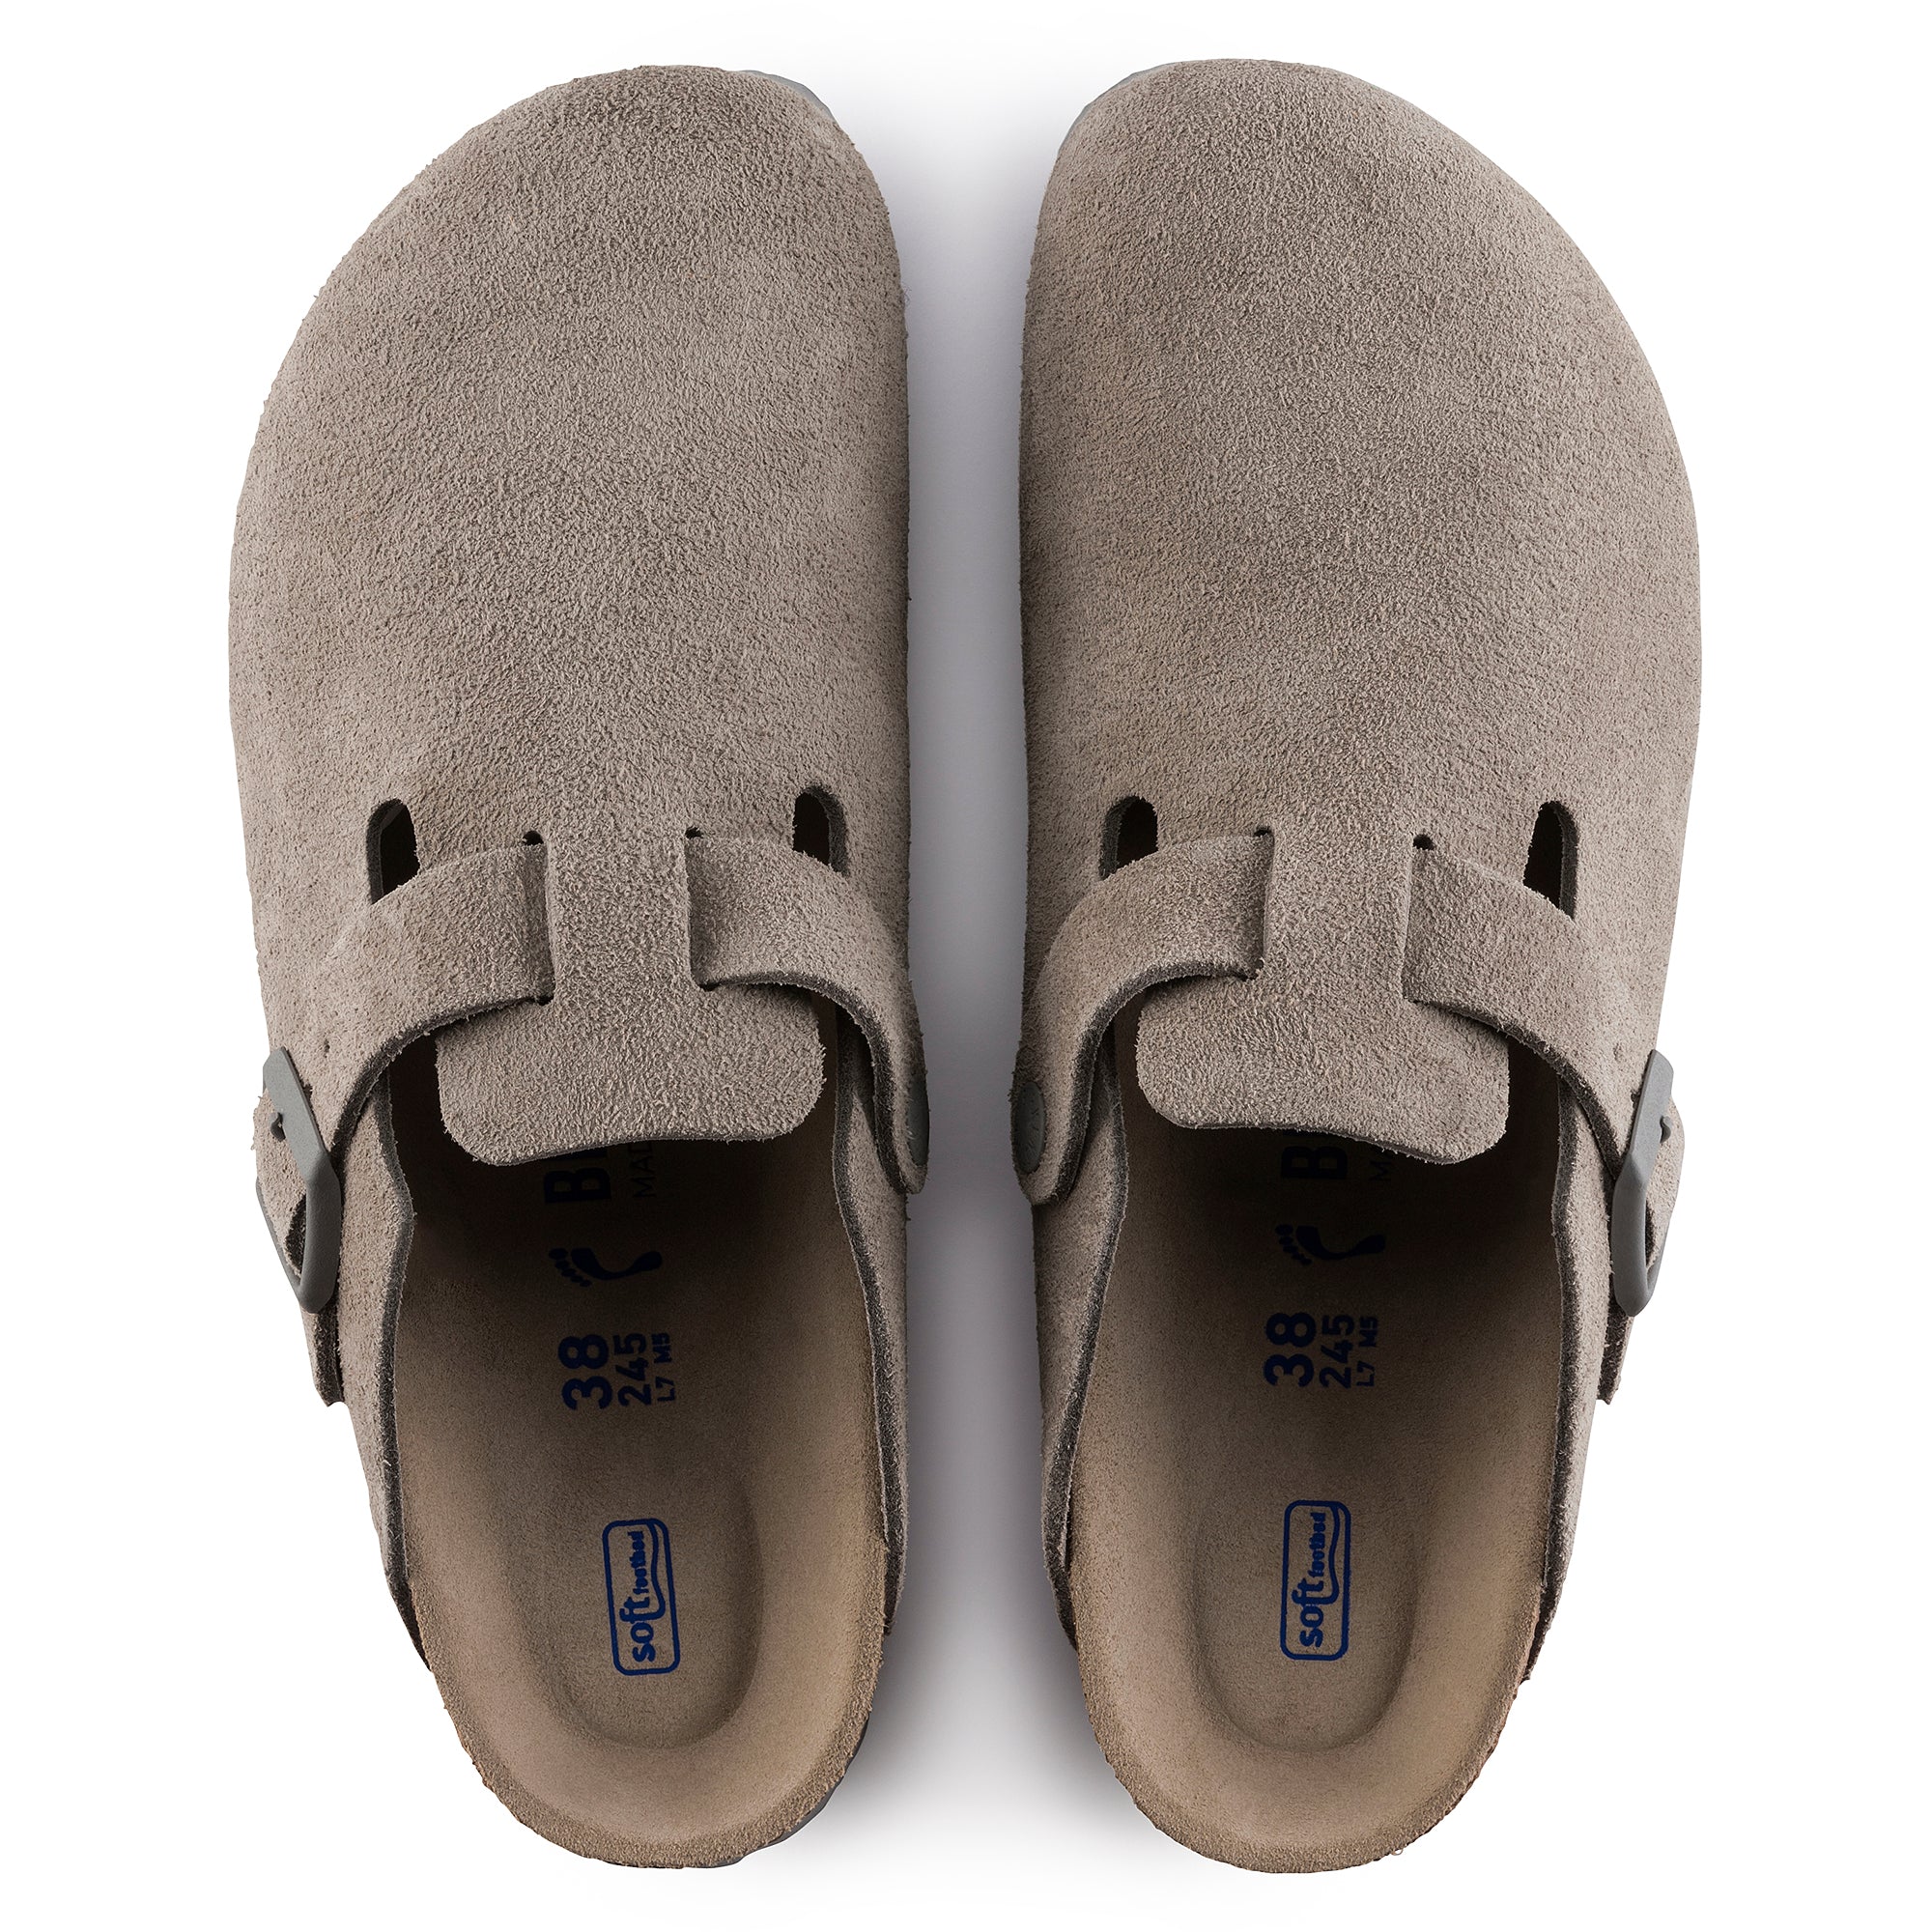 Boston Suede Leather in Stone Coin (Soft Footbed)